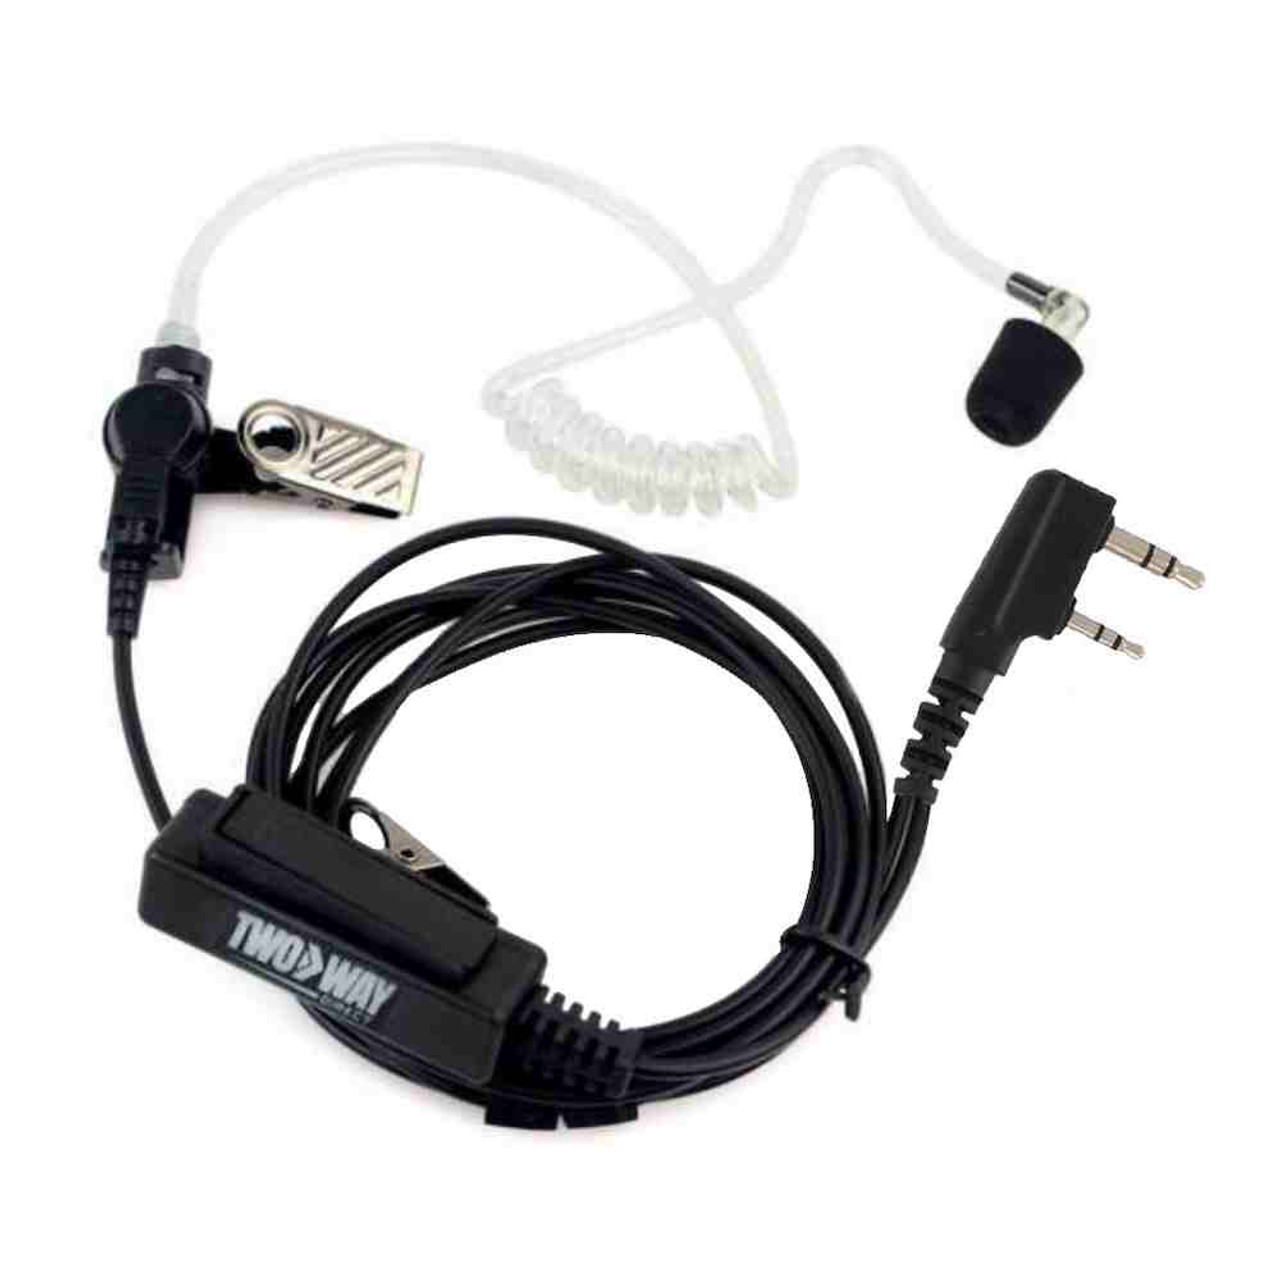 Direct 2-Wire Surveillance Kit Earpiece For Kenwood Radios | Way Direct